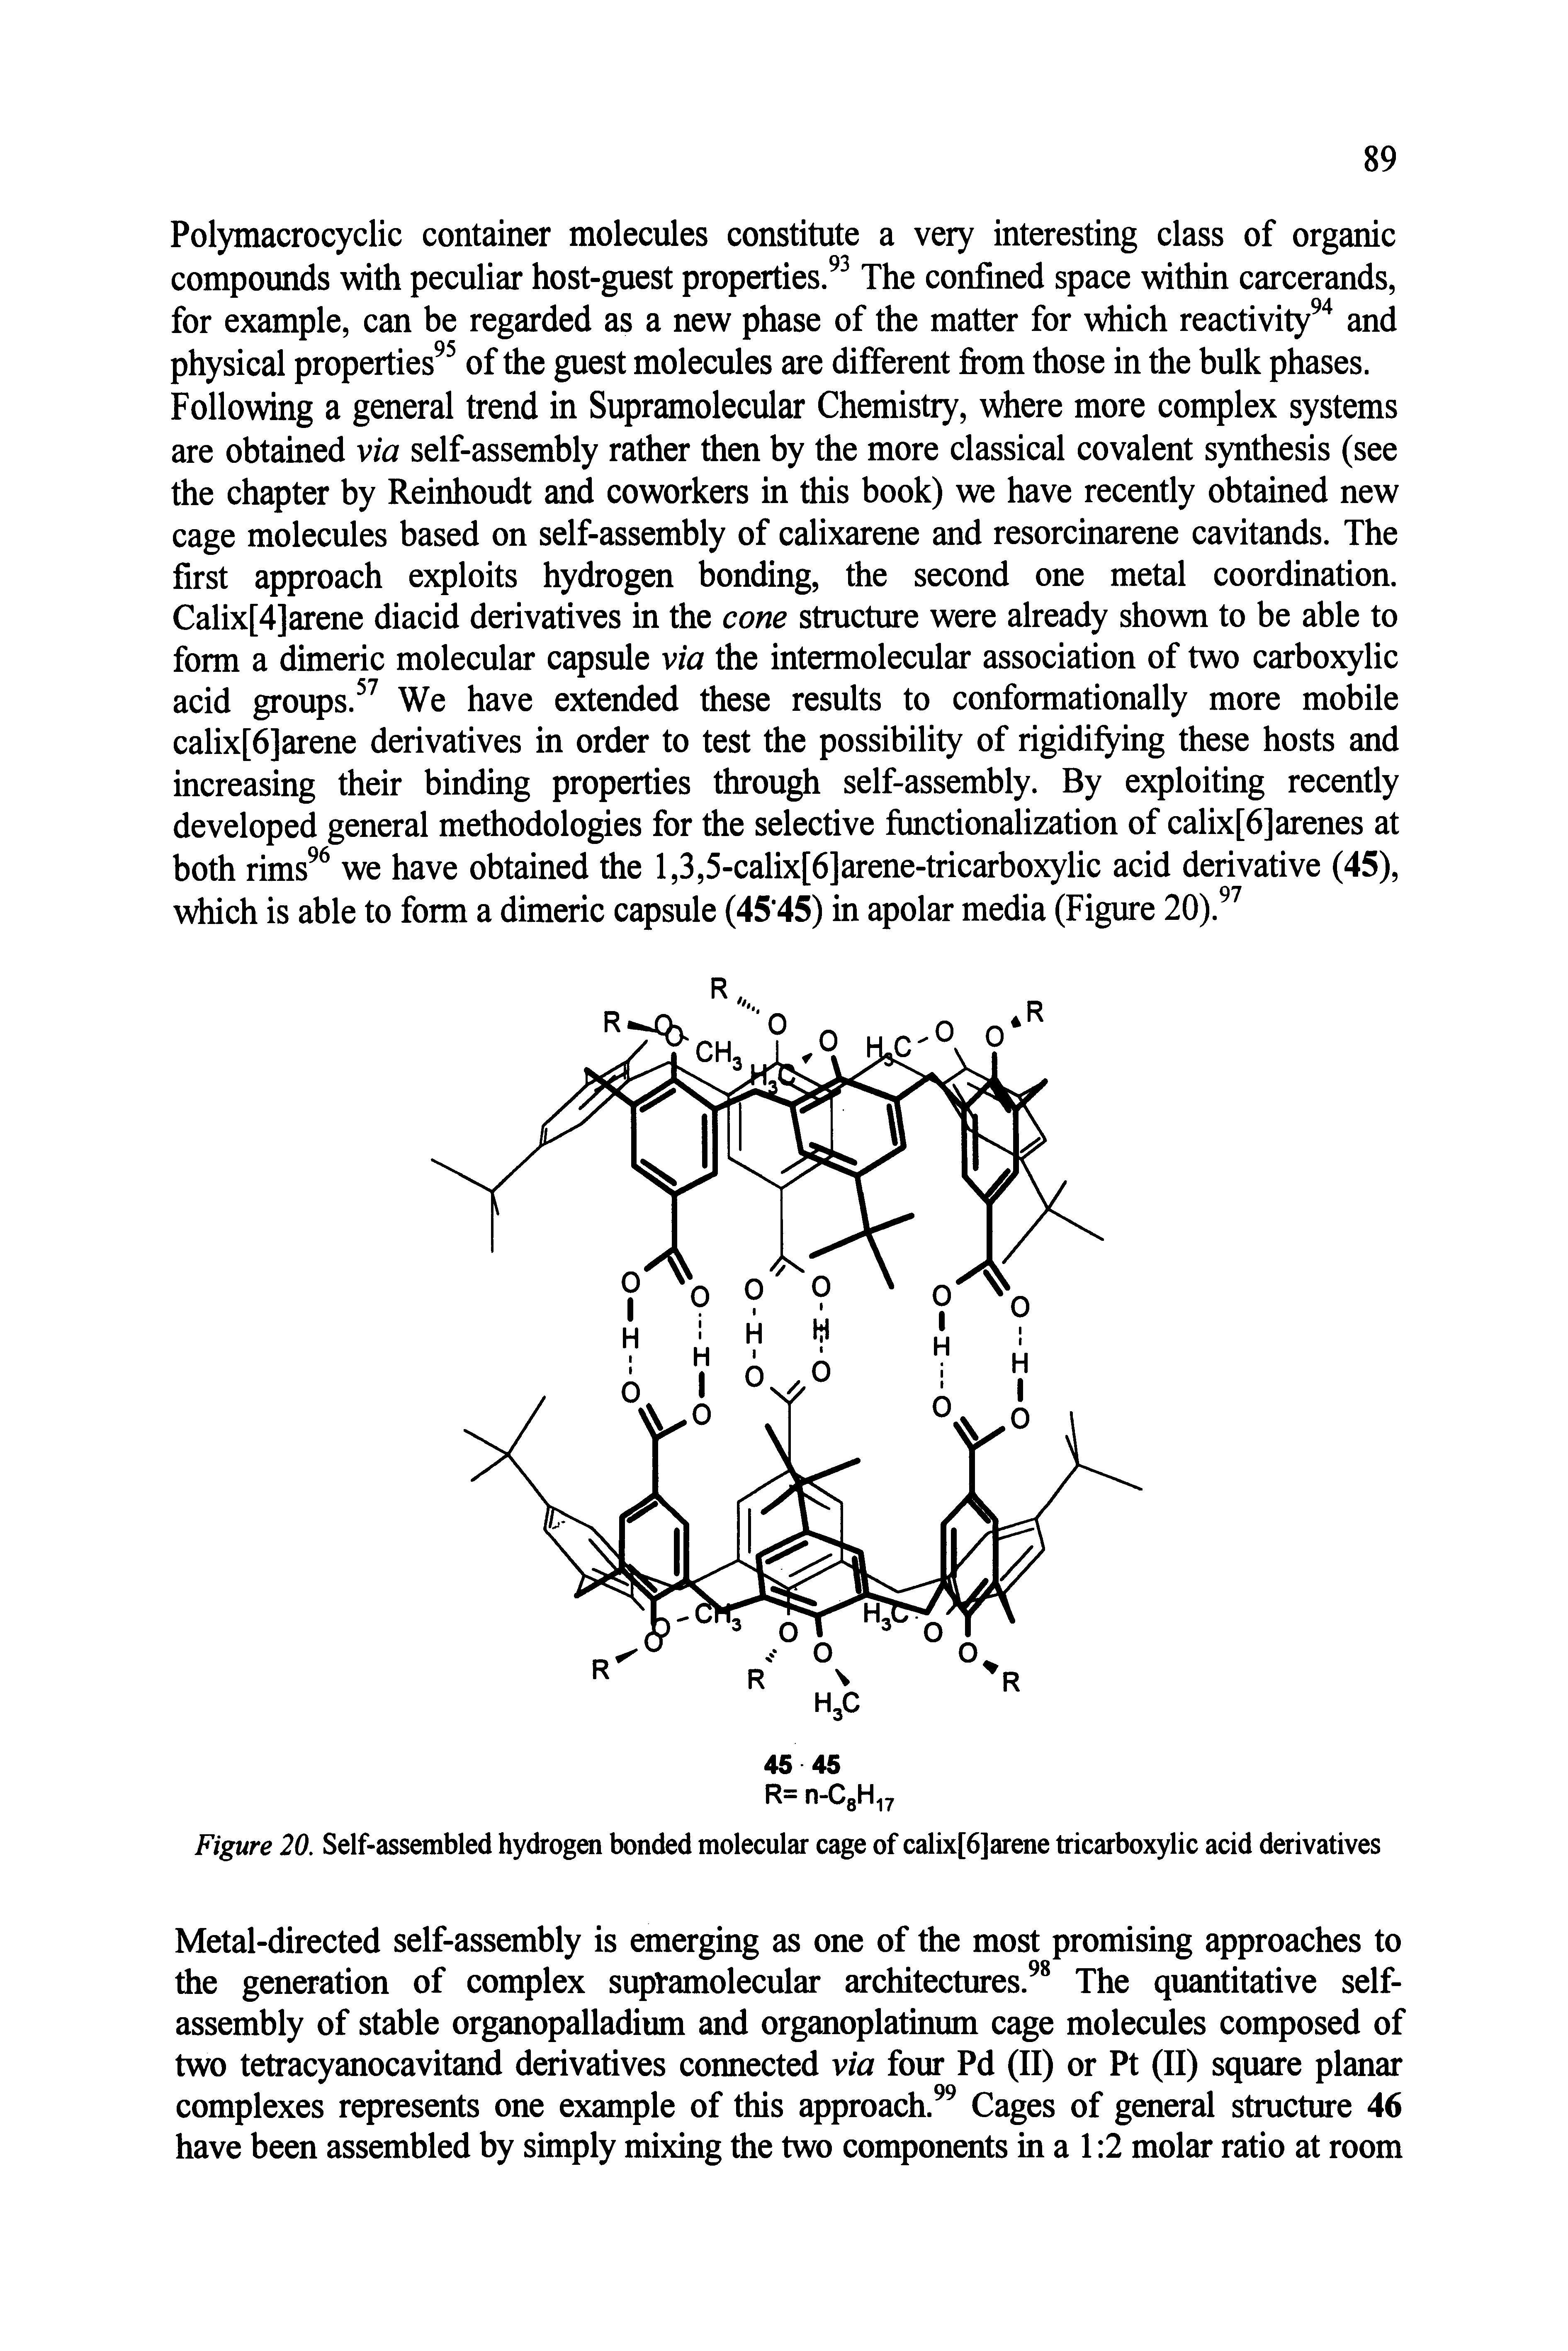 Figure 20. Self-assembled hydrogen bonded molecular cage of calix[6]arene tricarboxylic acid derivatives...